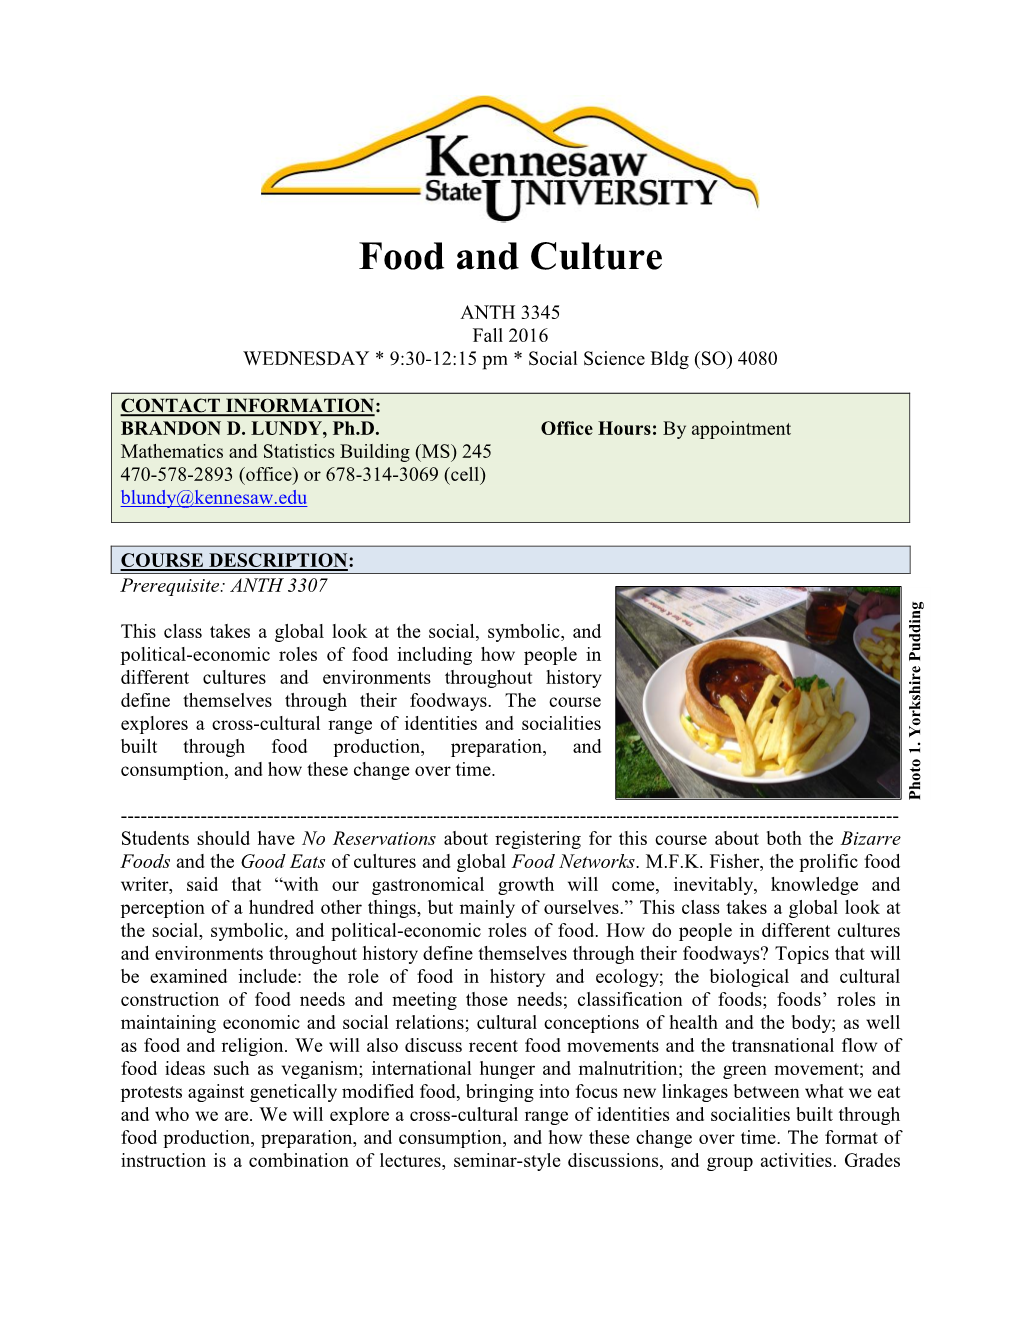 ANTH 3345 Food and Culture Syllabus